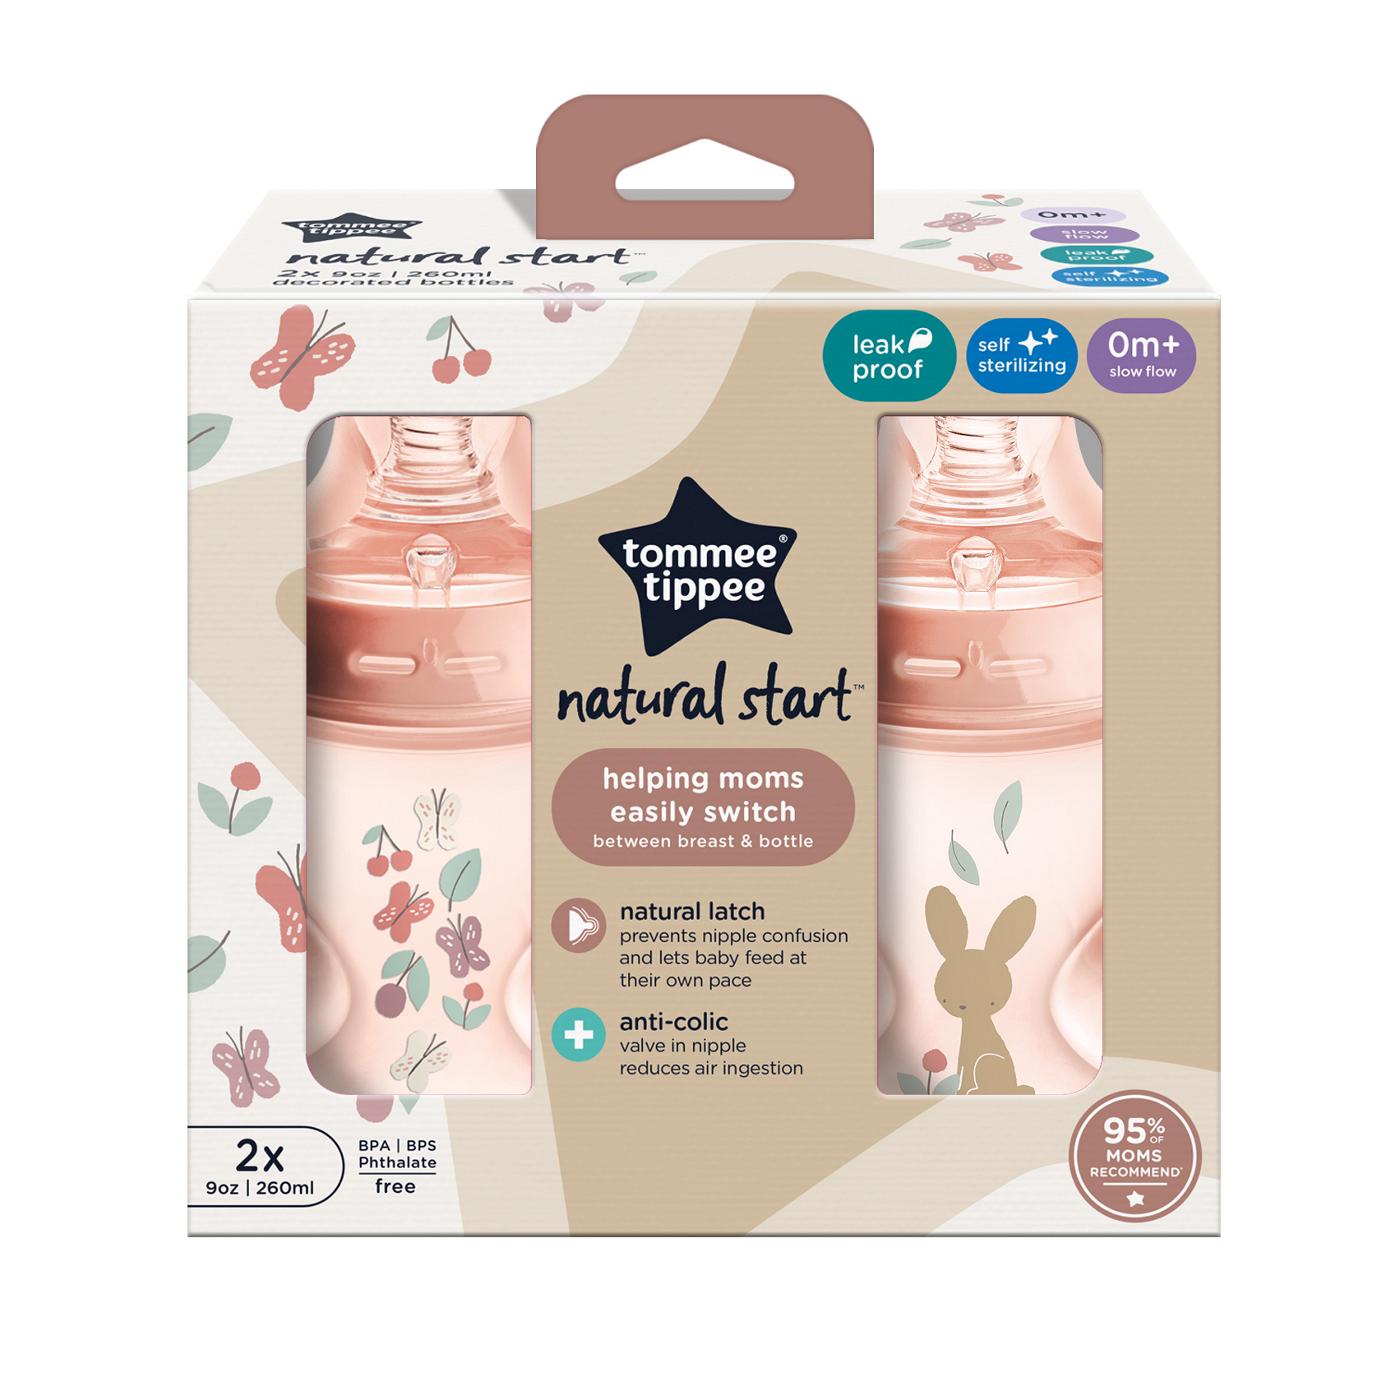 Tommee Tippee Natural Start Anti-Colic Bottles - Rose; image 1 of 2